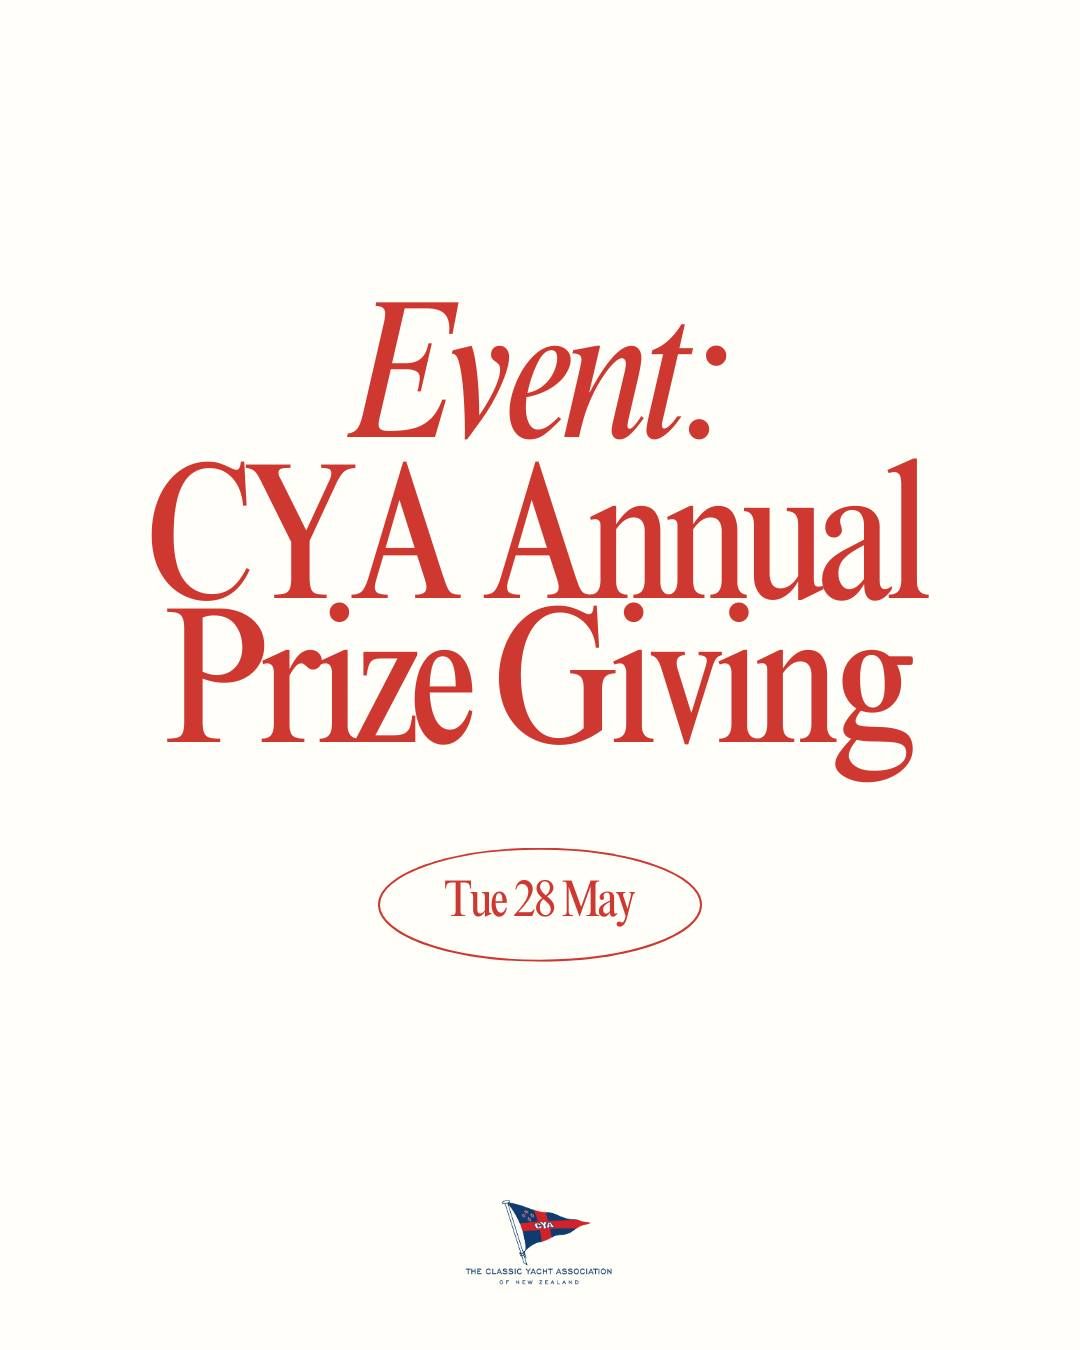 CYA's 28th Annual Prize Giving